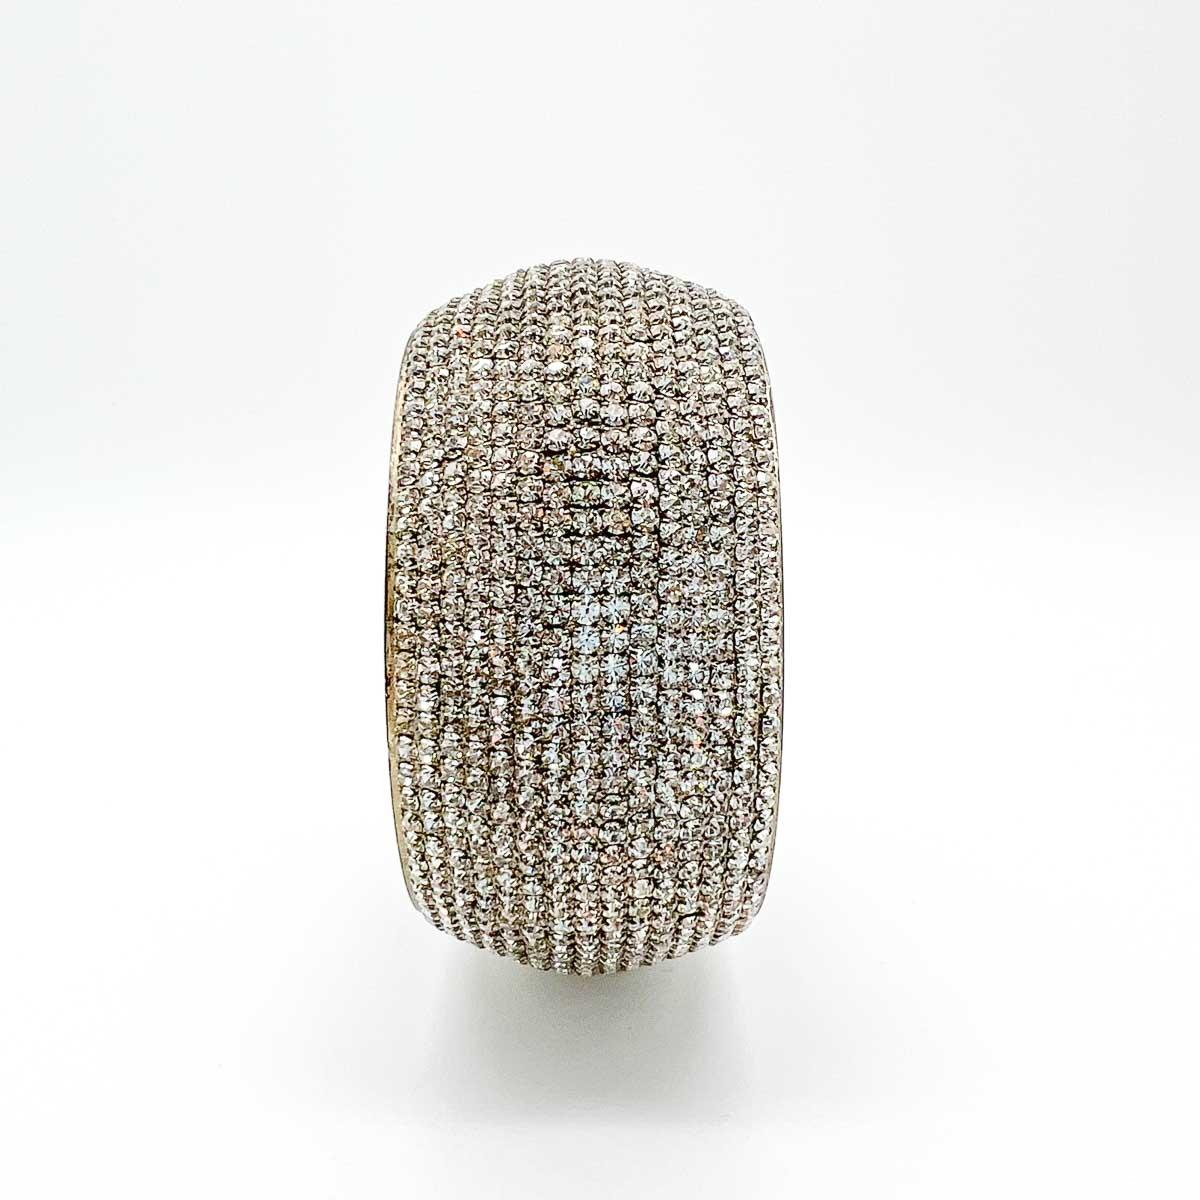 A stunning Vintage Diamante Bangle oozing wall to wall sparkly crystals. Worn alone or stacked this incredible piece will add glam on every outing.
Vintage Condition: Very good without damage or noteworthy wear. The silver plating inside the bangle